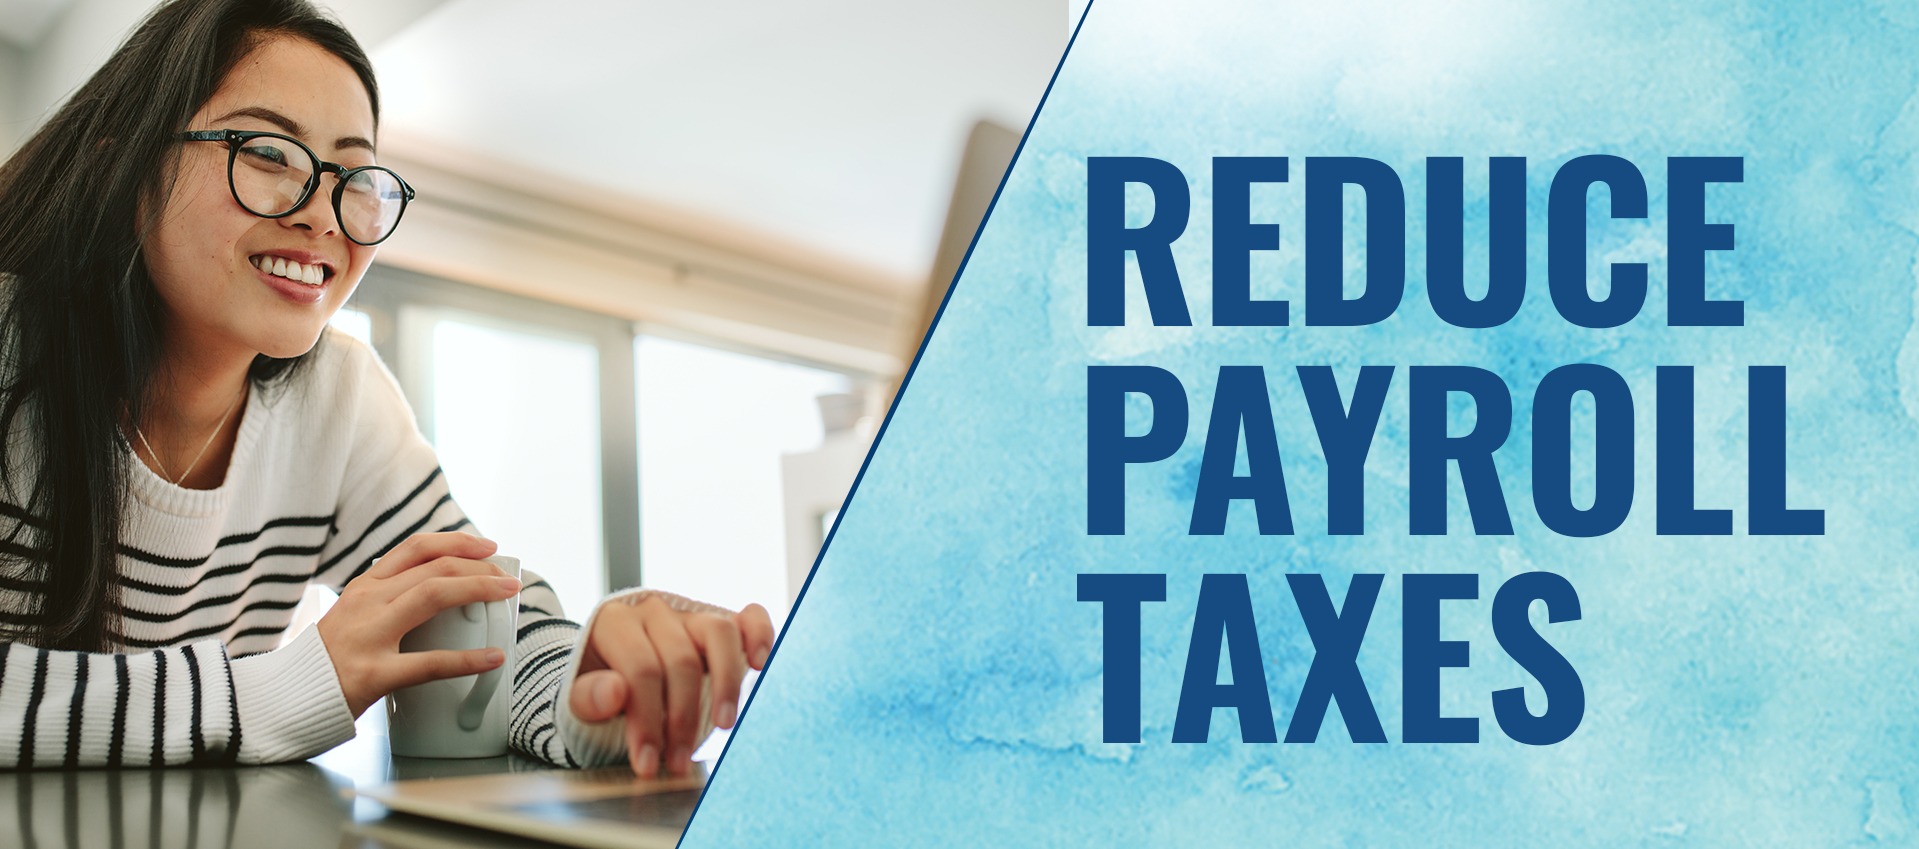 Small Business Employees Can Get Money to Reduce Their Payroll Taxes